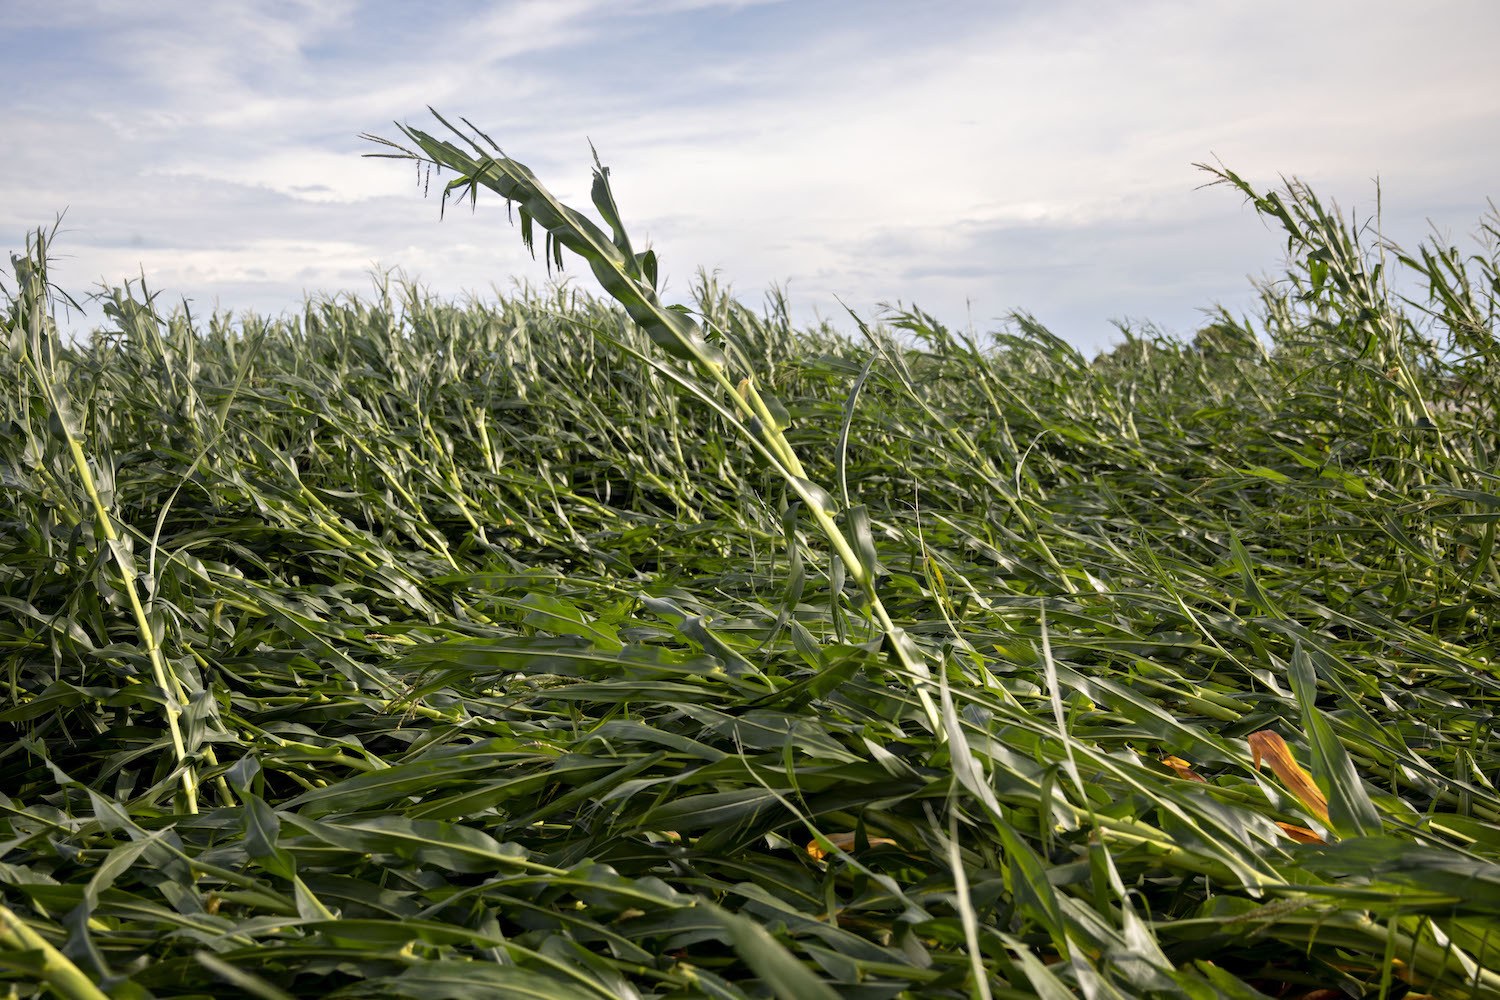 Corn plants lie on the ground following a derecho storm, a widespread wind storm associated with a band of rapidly moving showers or thunderstorms, on August 10, 2020 near Polo, Illinois.